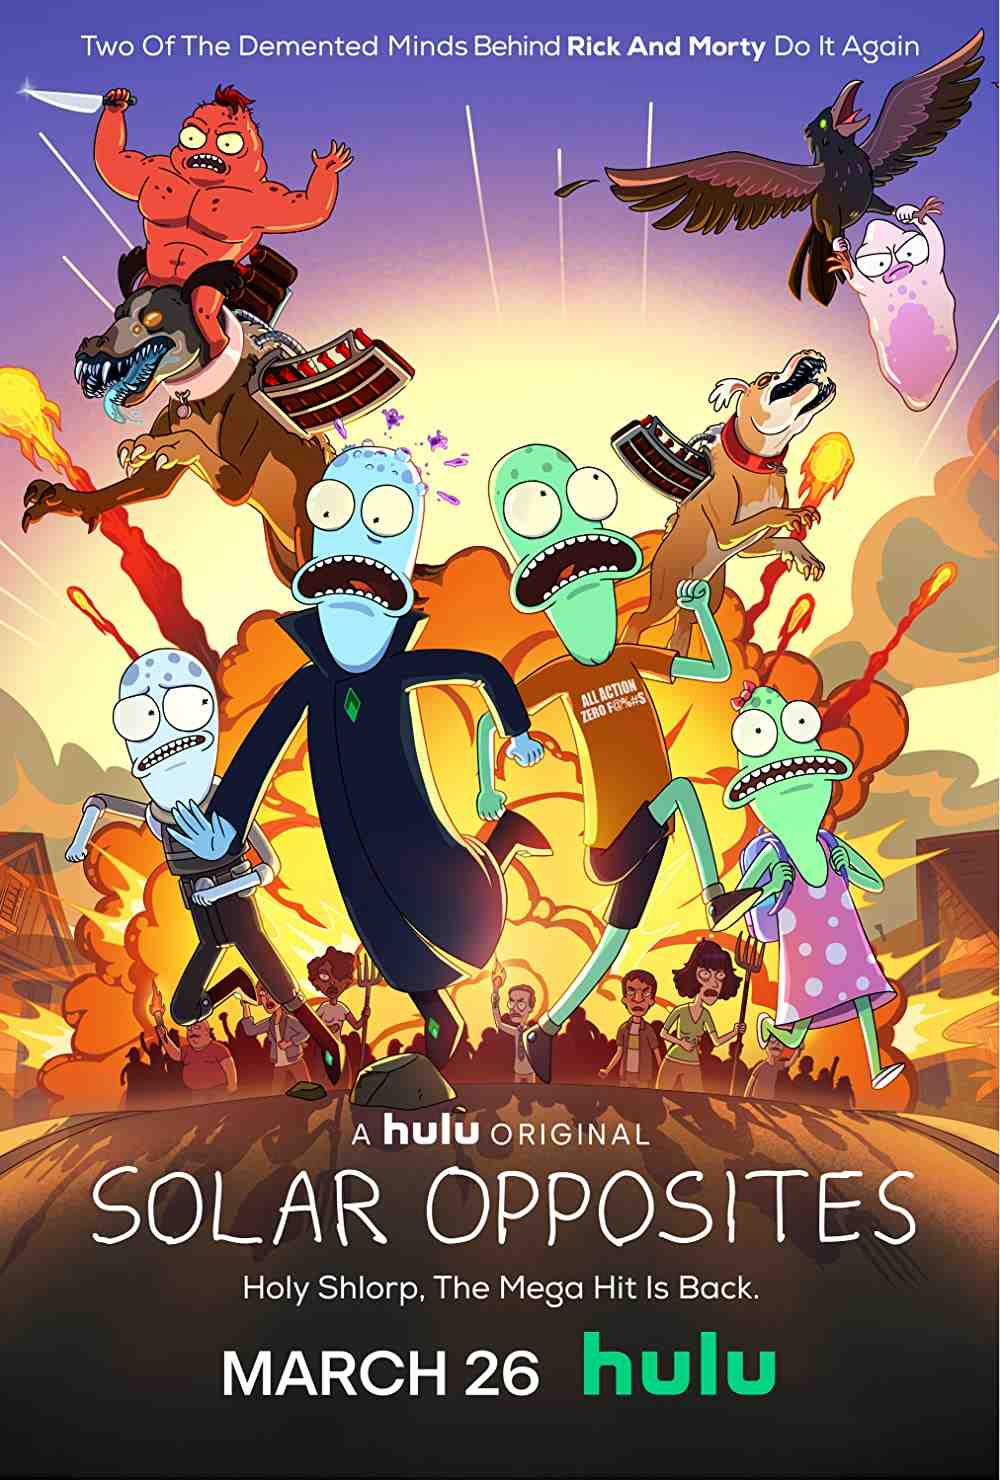 What happened to the janitor in Solar Opposites?